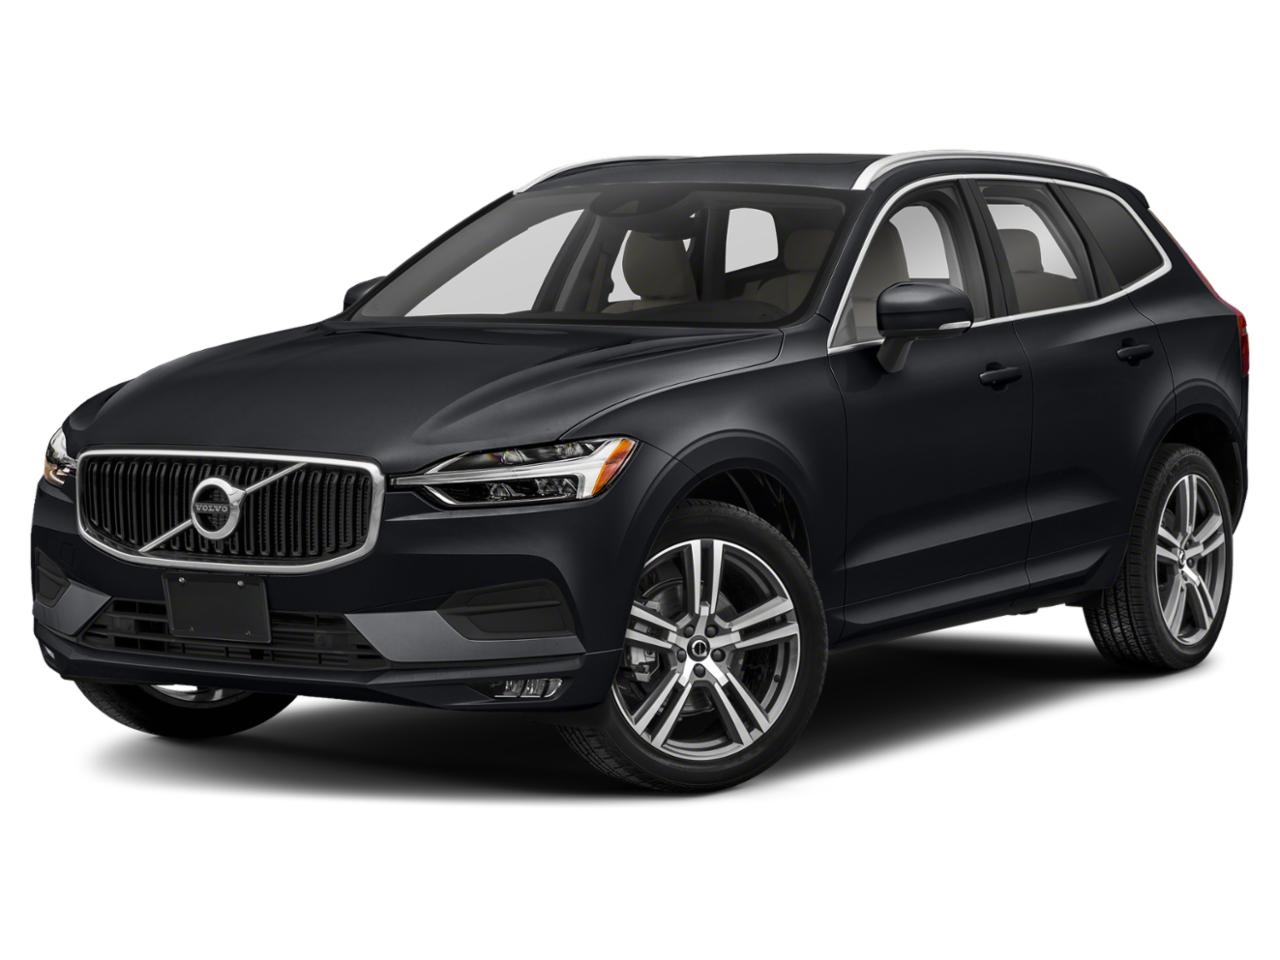 Onyx Black Metallic New 2021 Volvo XC60 for Sale at a Grubbs Dealership ...